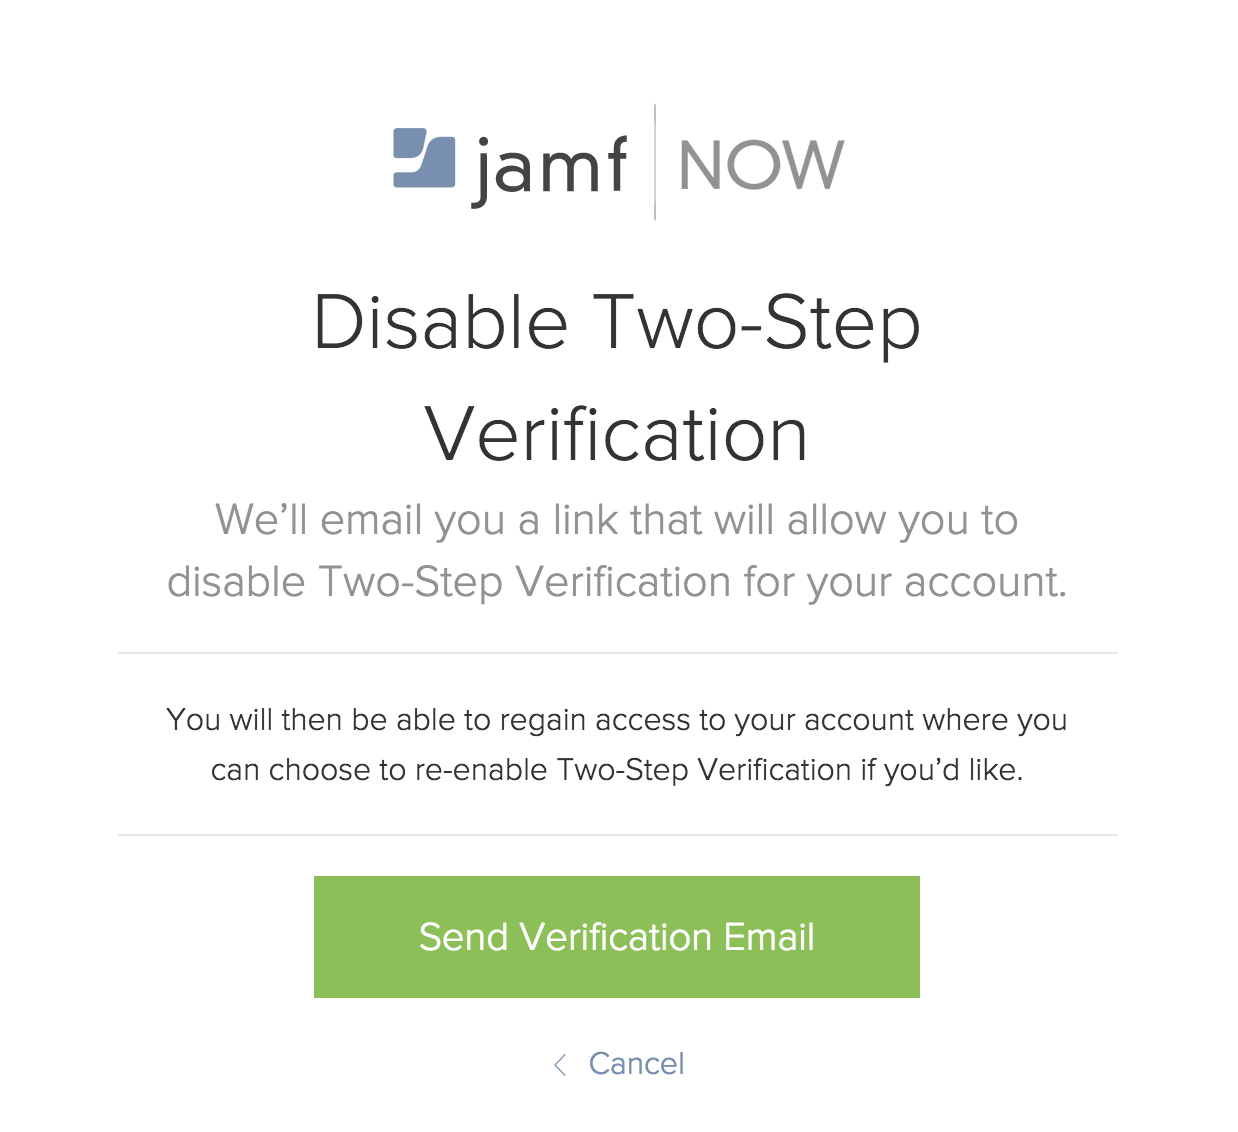 Screenshot of the Disable Two-Step Verification pop-up screen, with a button to Send Verification Email.